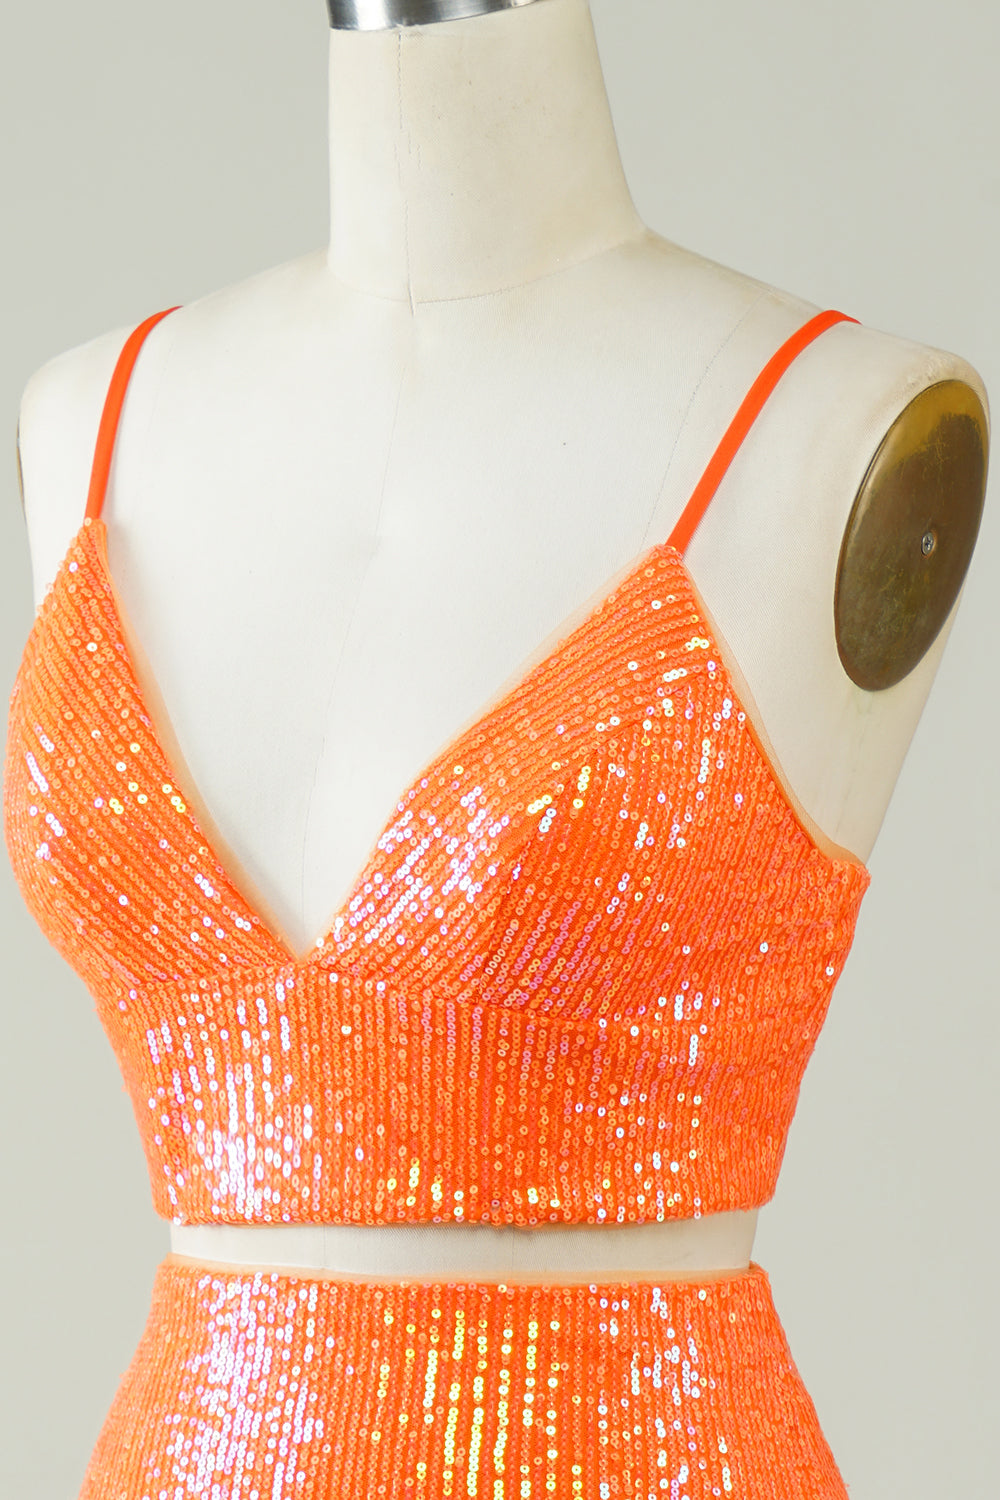 Two Piece Orange Sequins Tight Homecoming Dress